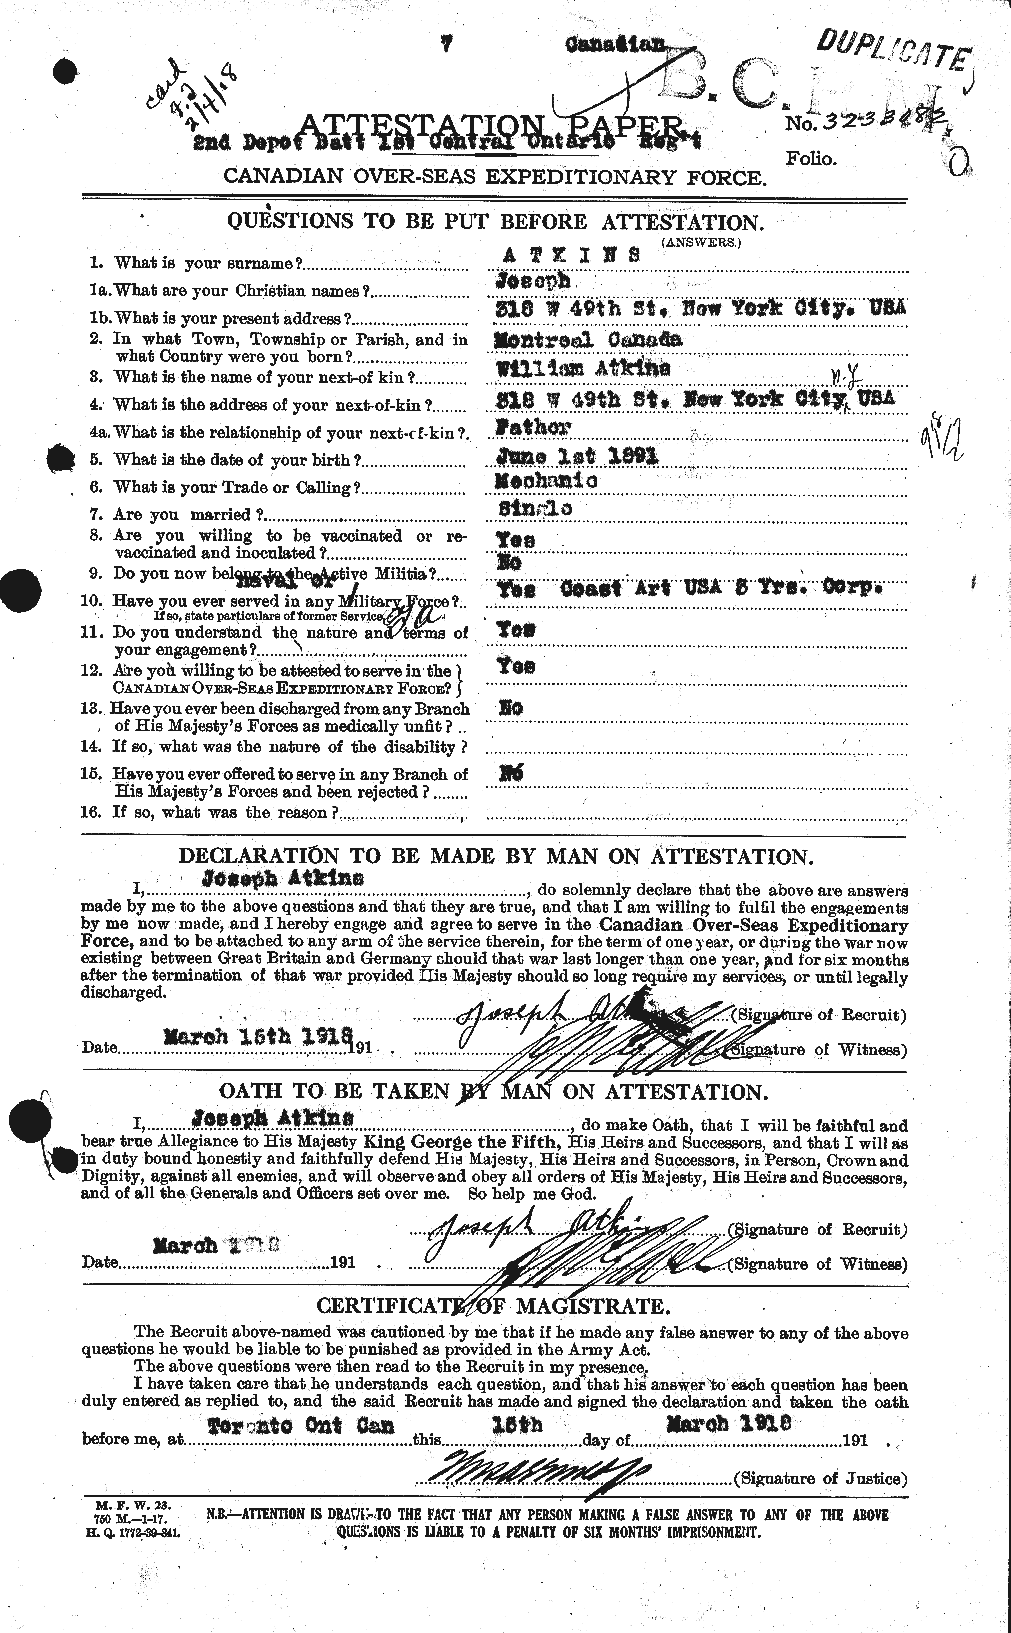 Personnel Records of the First World War - CEF 216811a